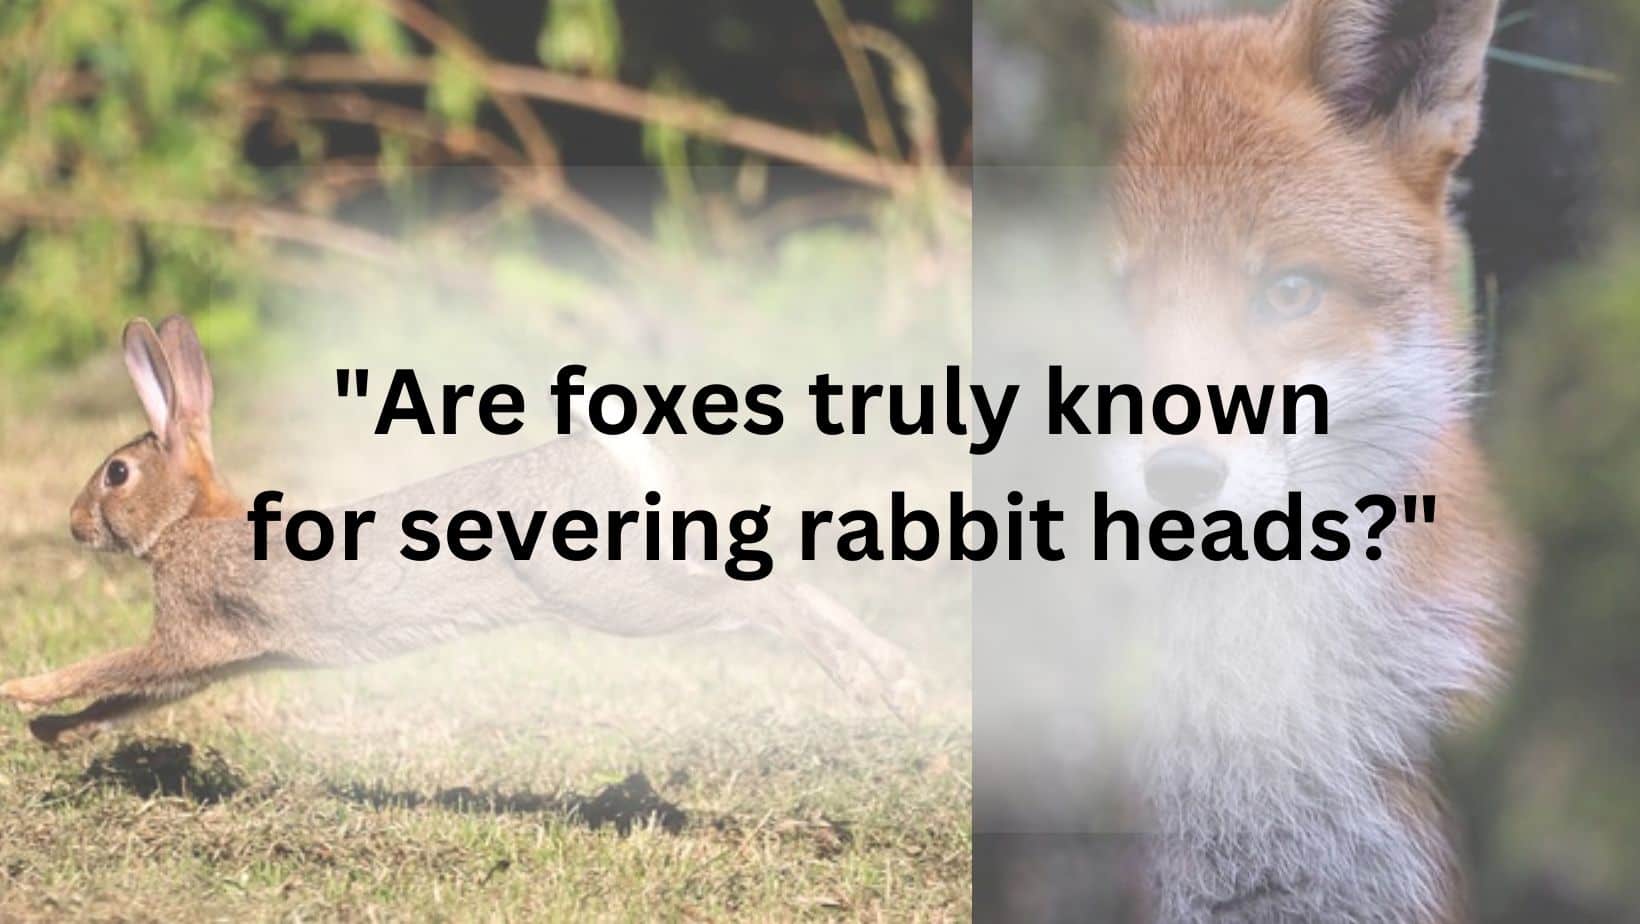 "Are foxes truly known for severing rabbit heads?"